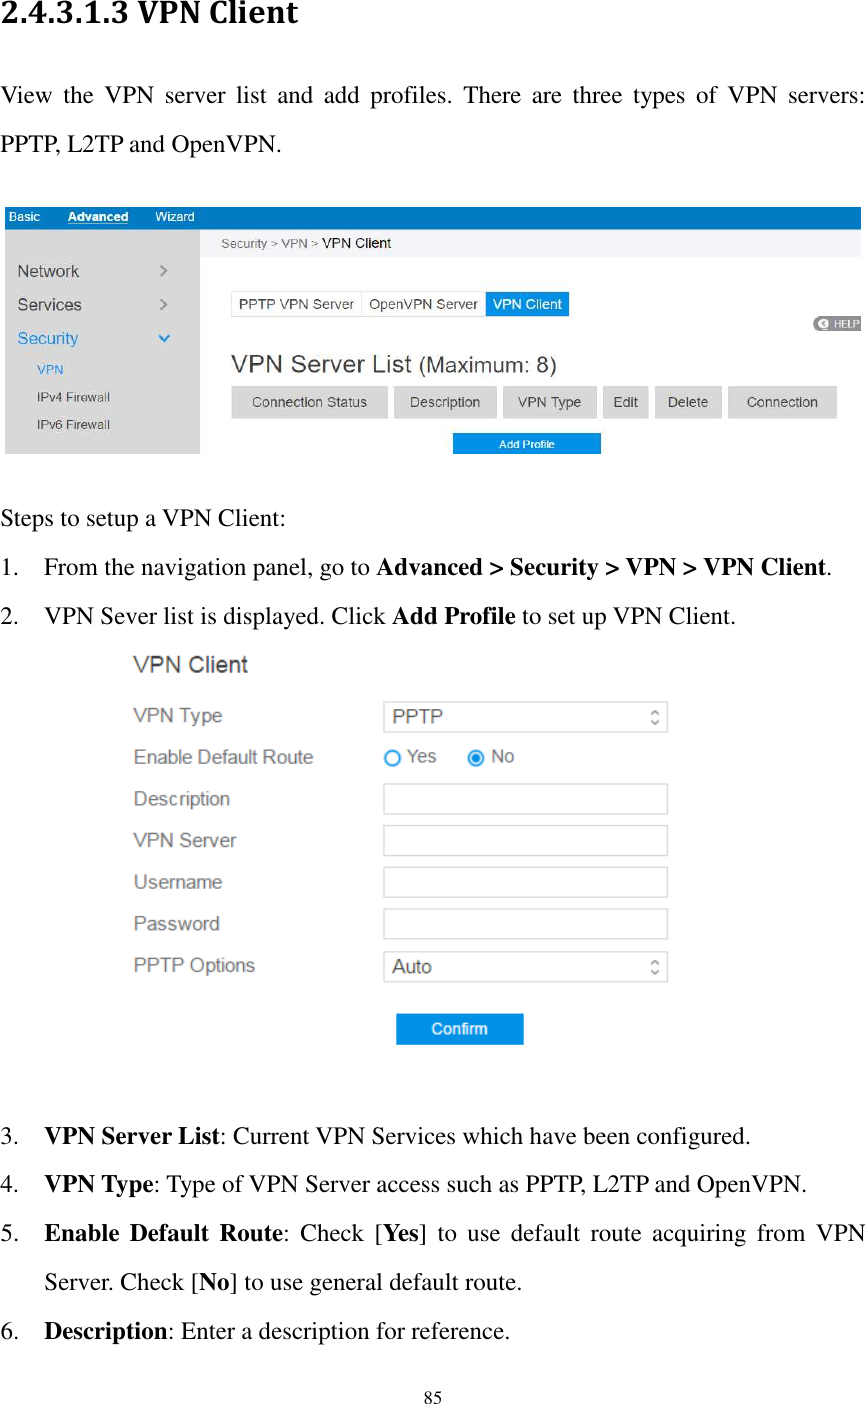  85  2.4.3.1.3 VPN Client View  the  VPN  server  list  and  add  profiles.  There  are  three  types  of  VPN  servers: PPTP, L2TP and OpenVPN.    Steps to setup a VPN Client:   1. From the navigation panel, go to Advanced &gt; Security &gt; VPN &gt; VPN Client. 2. VPN Sever list is displayed. Click Add Profile to set up VPN Client.   3. VPN Server List: Current VPN Services which have been configured. 4. VPN Type: Type of VPN Server access such as PPTP, L2TP and OpenVPN. 5. Enable  Default  Route:  Check [Yes]  to  use  default  route  acquiring  from  VPN Server. Check [No] to use general default route. 6. Description: Enter a description for reference. 